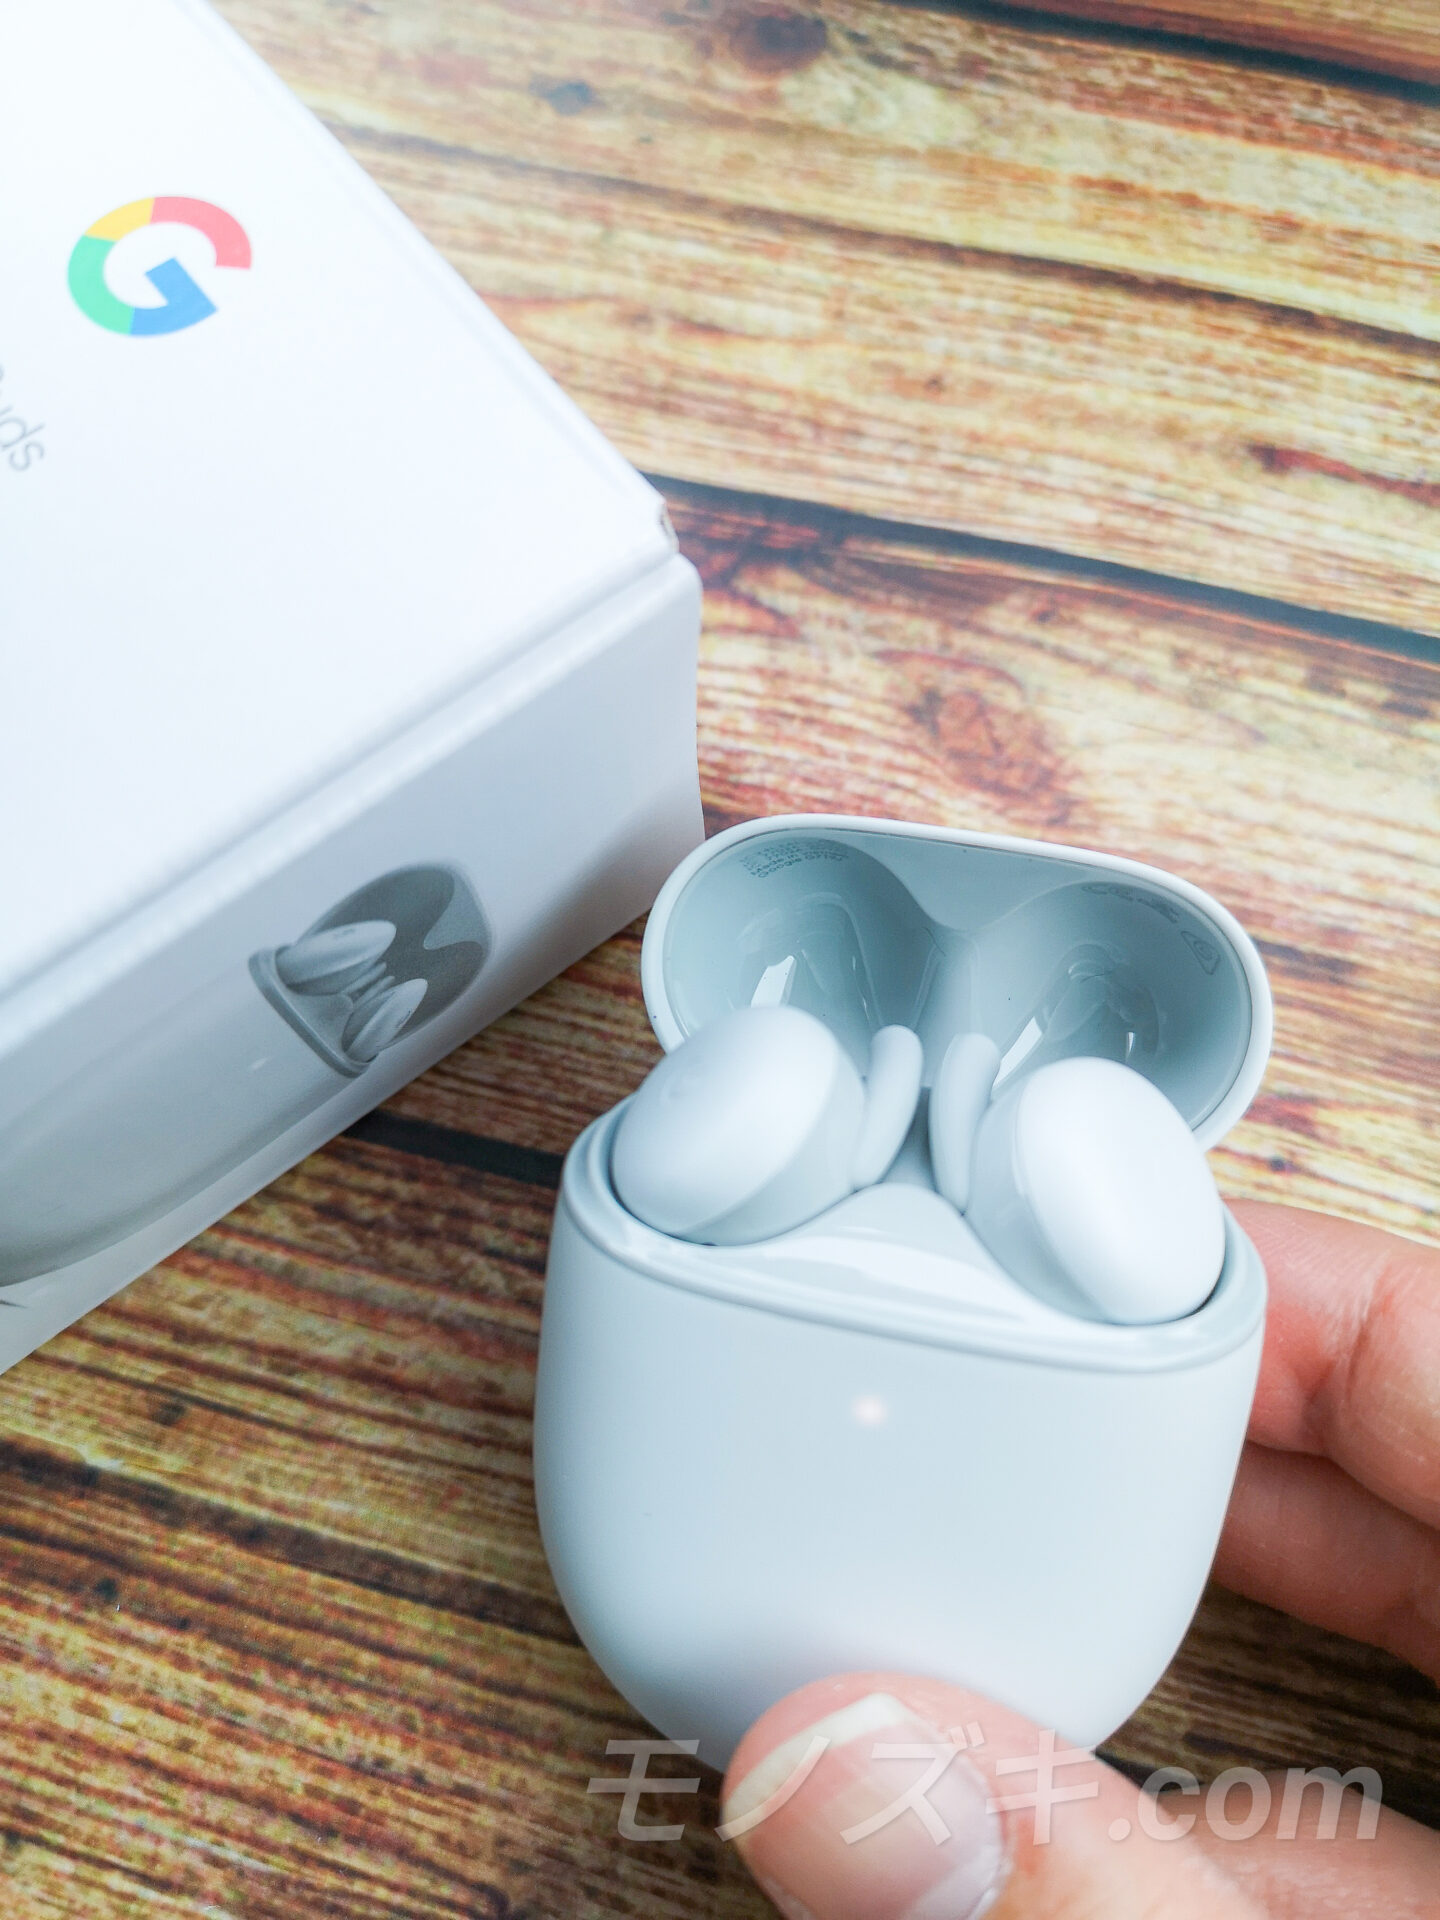 Google Pixel Buds A-Series 充電ケースから取り出し